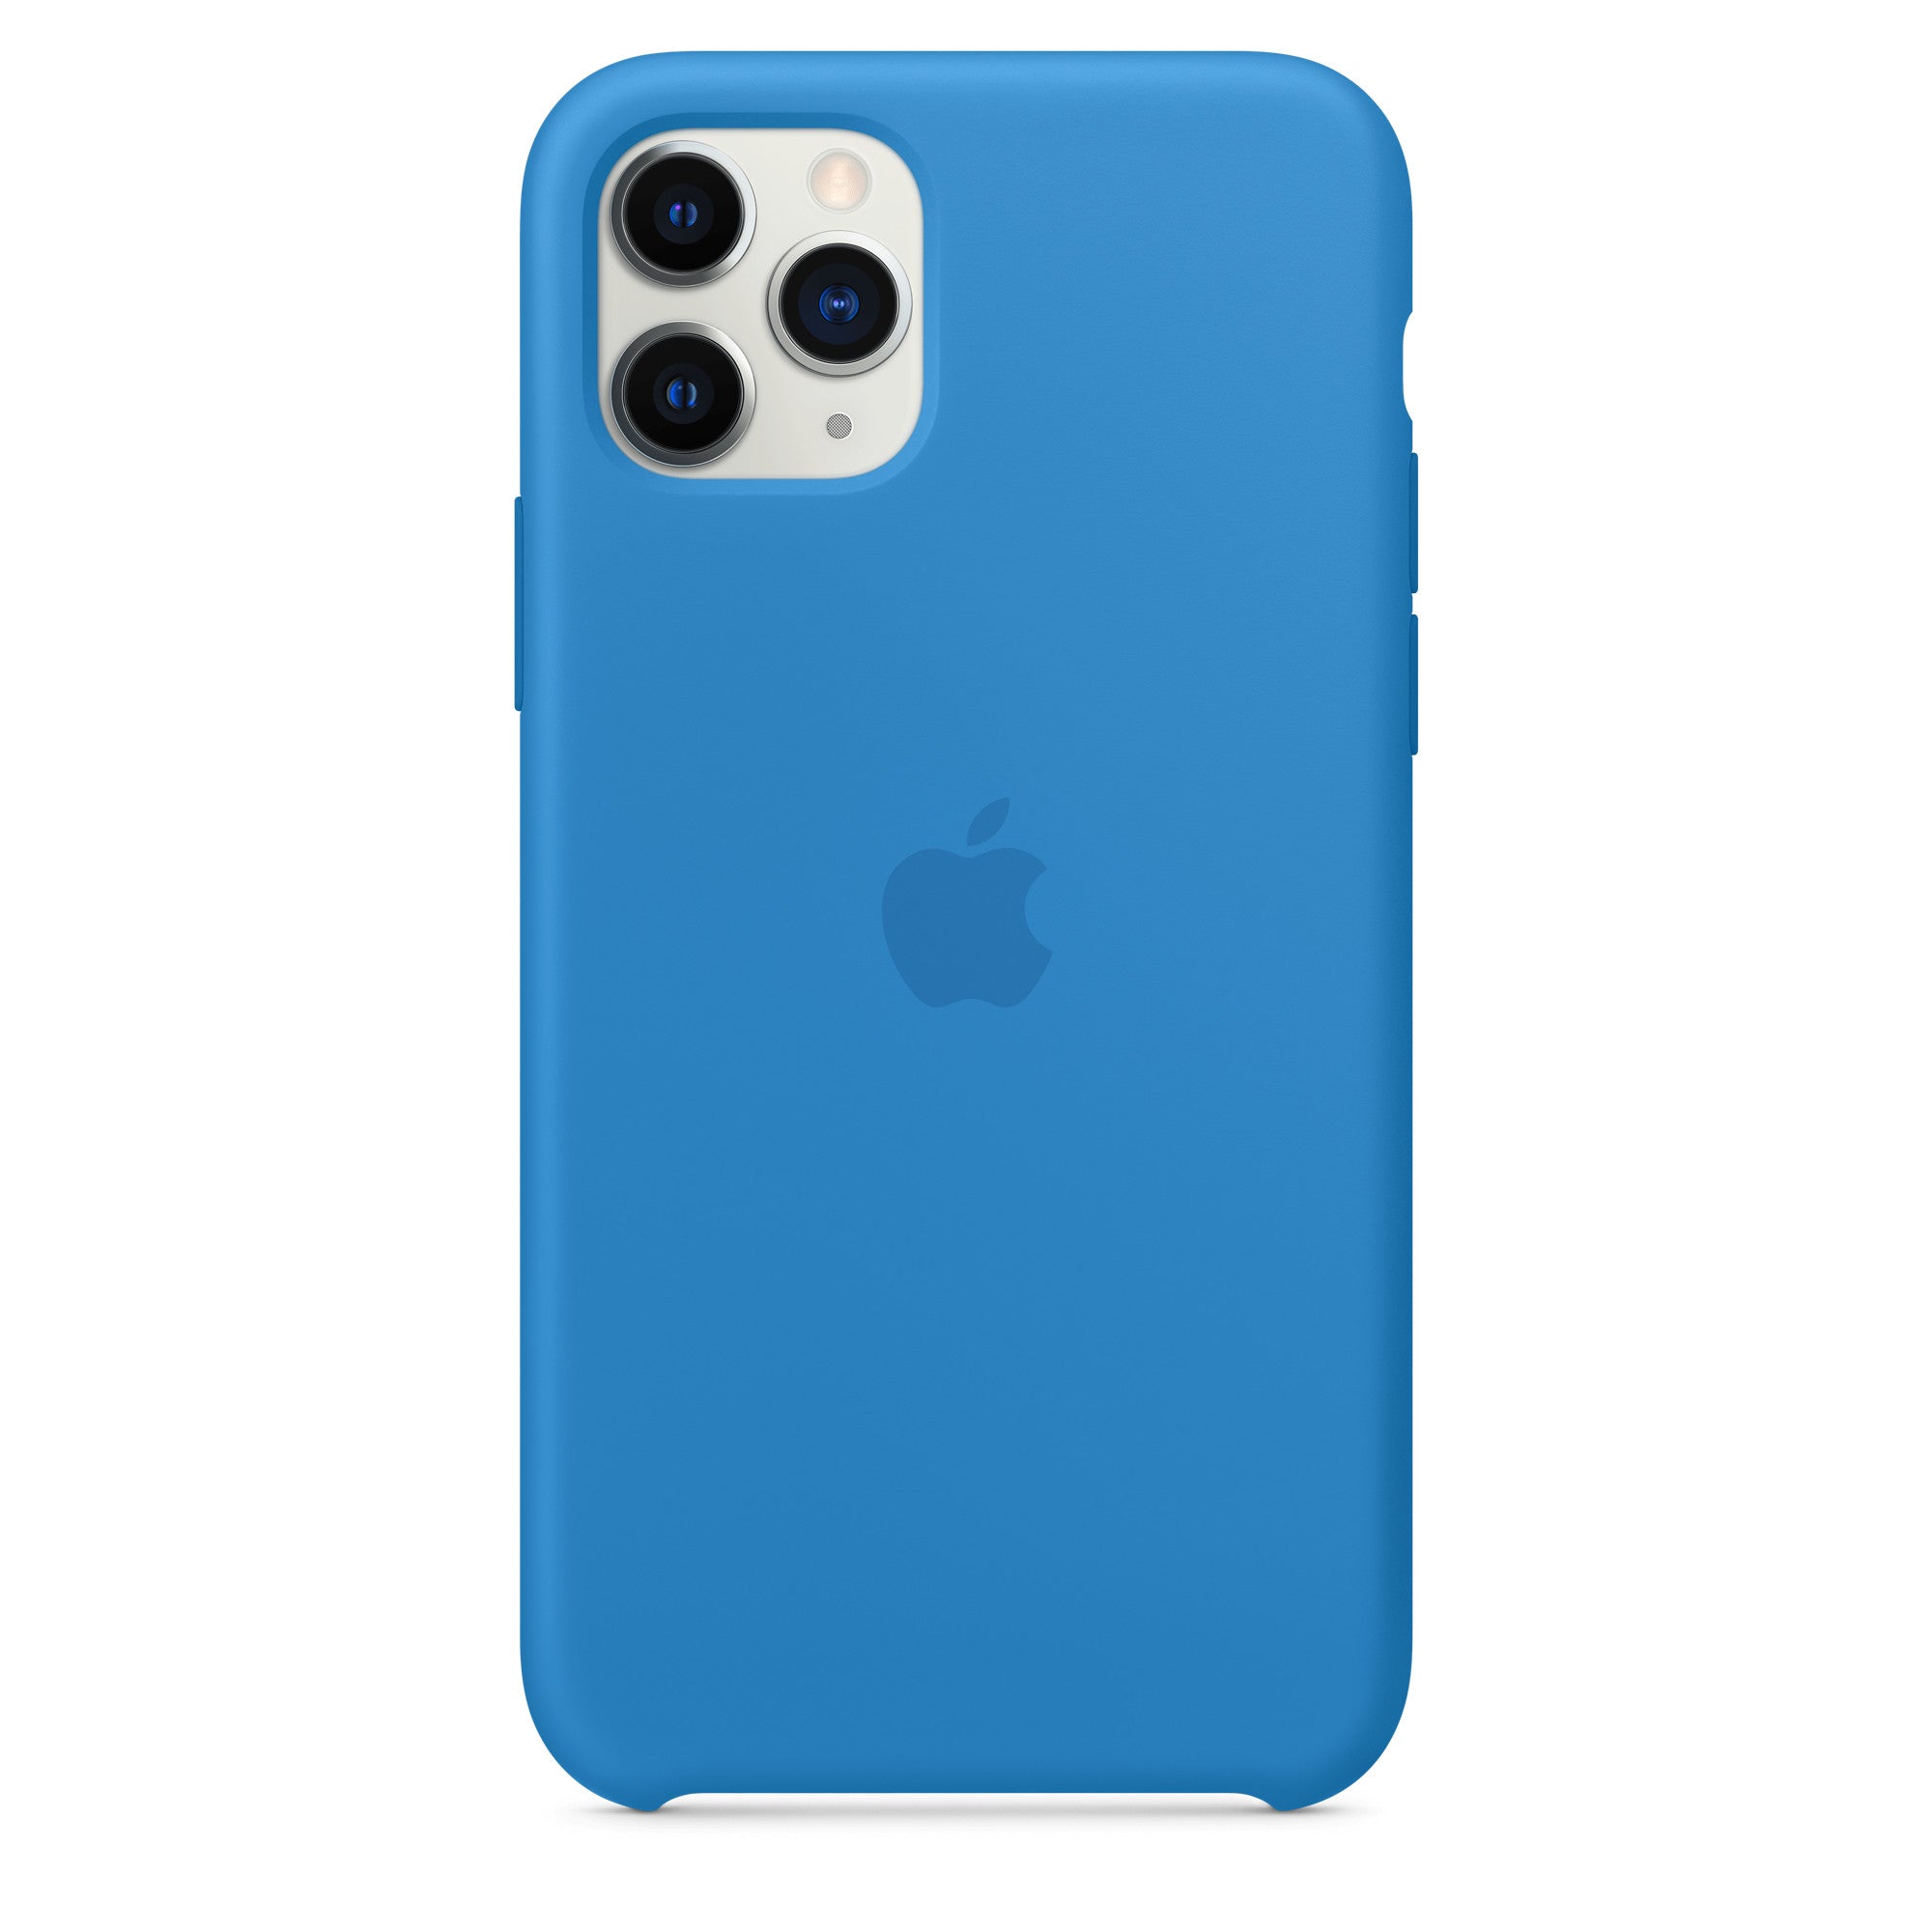 Apple iPhone 11 Pro Silicone Case Surf Blue Surf Blue New - Sealed